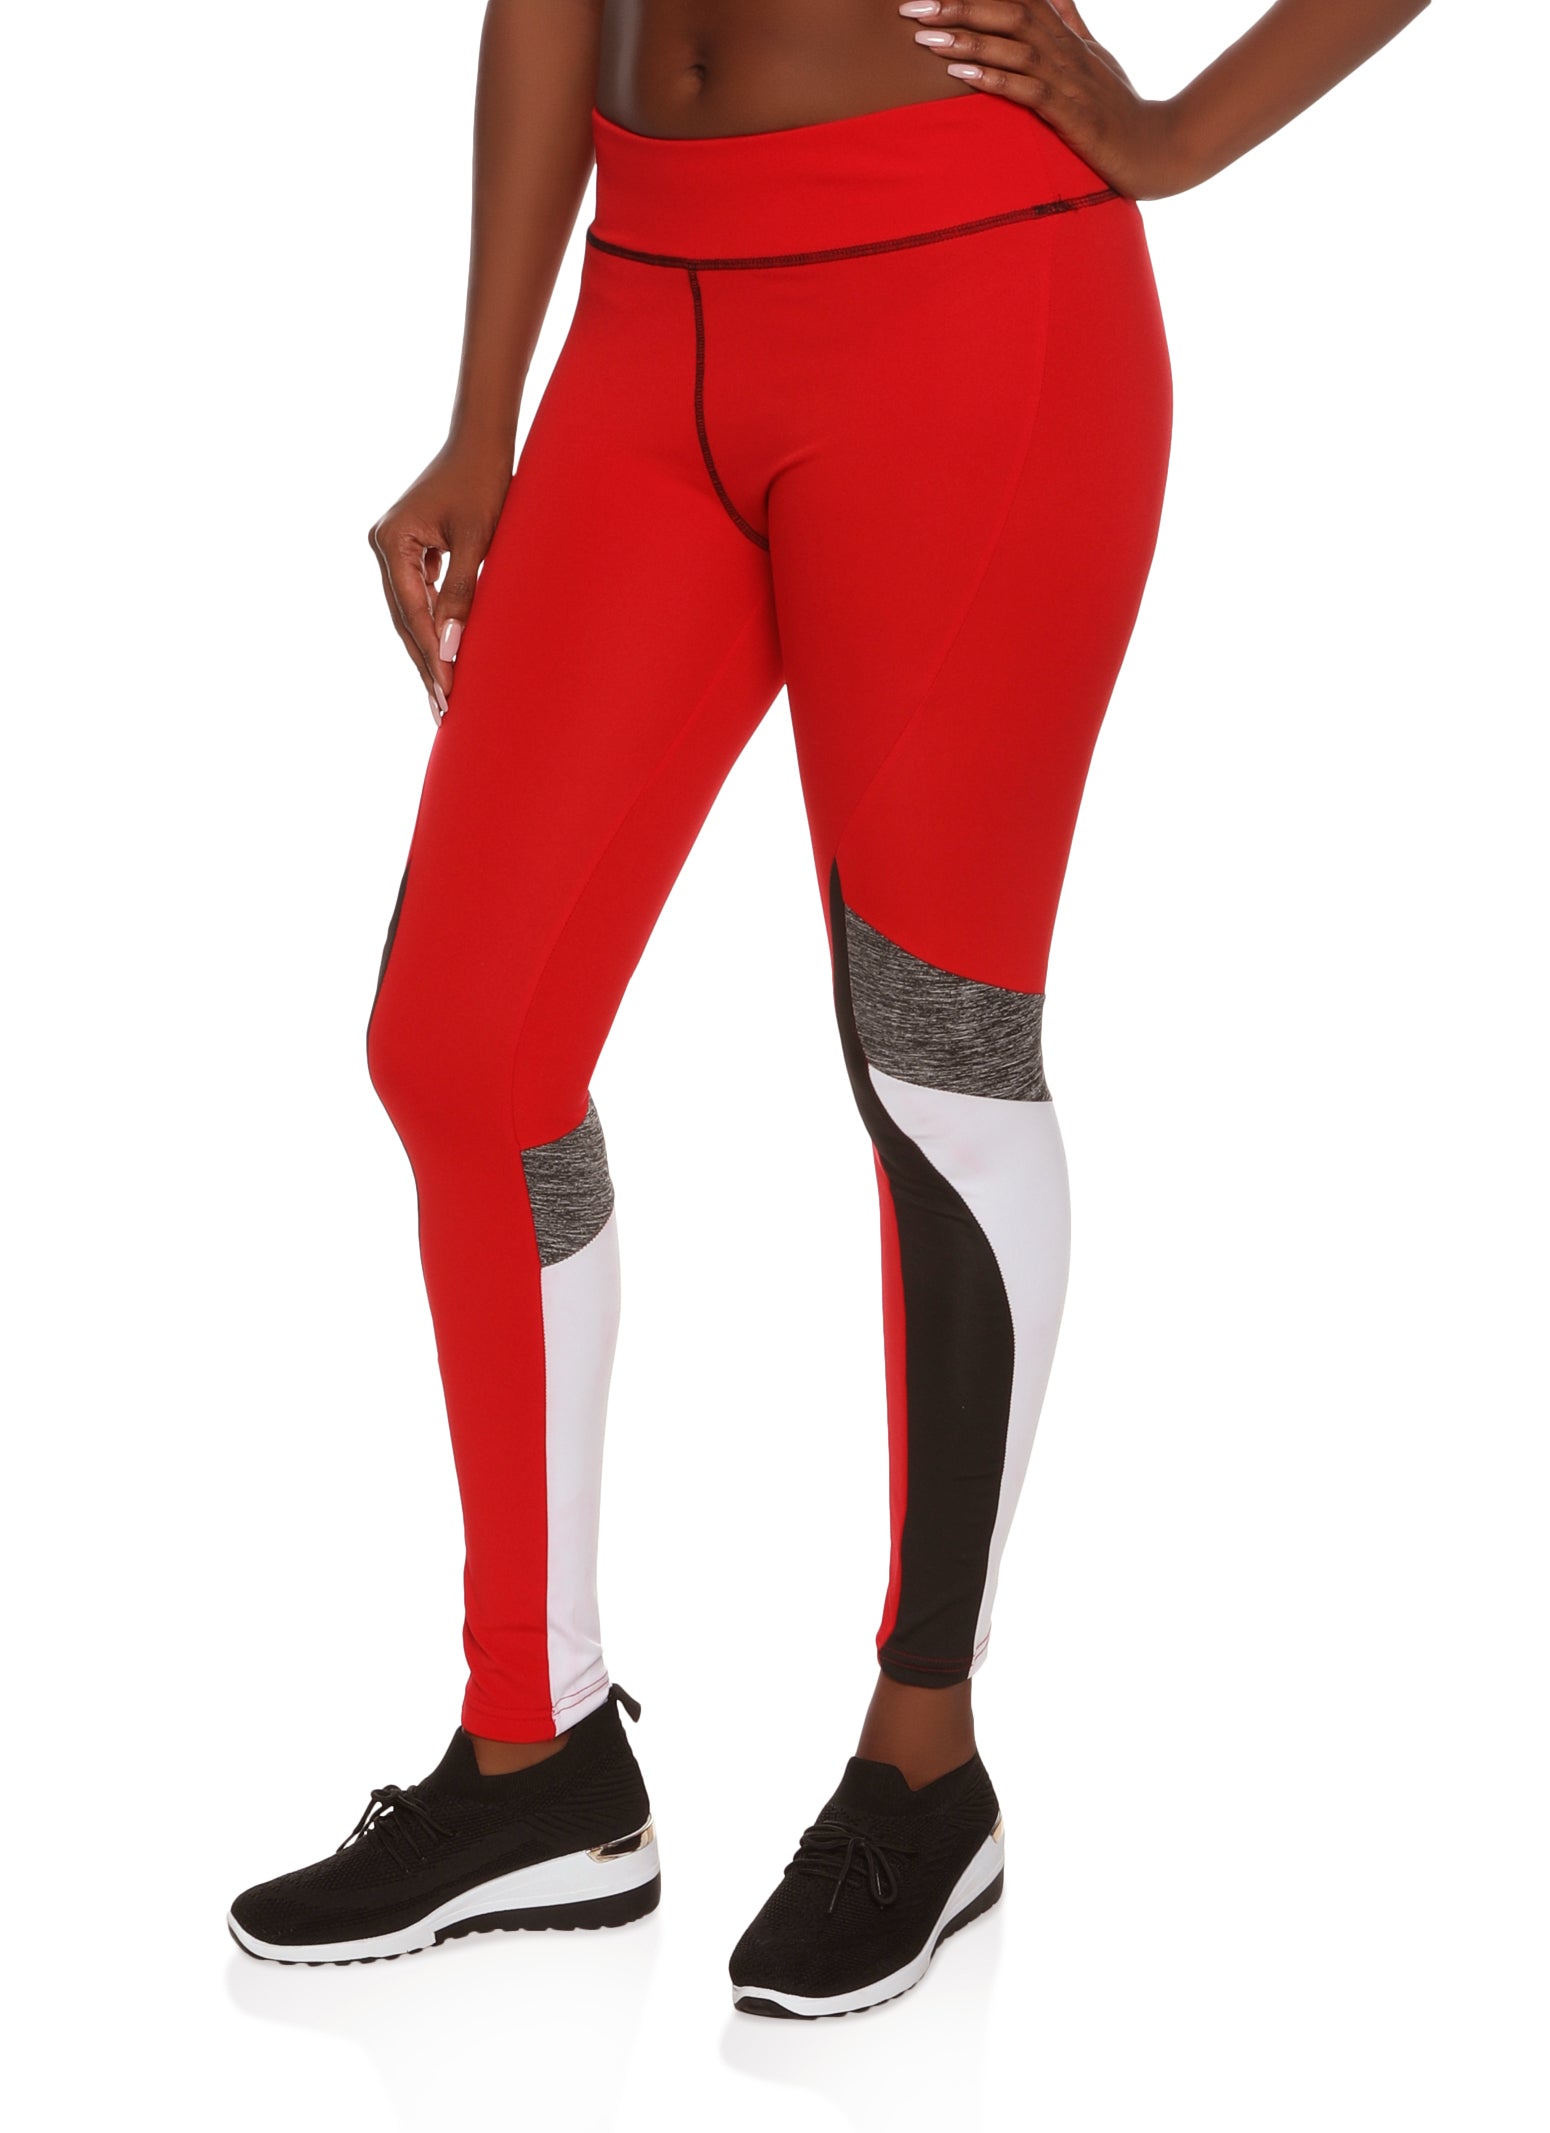 Performance Legging Tights For Women (Leopard Red) – ReDesign Sports